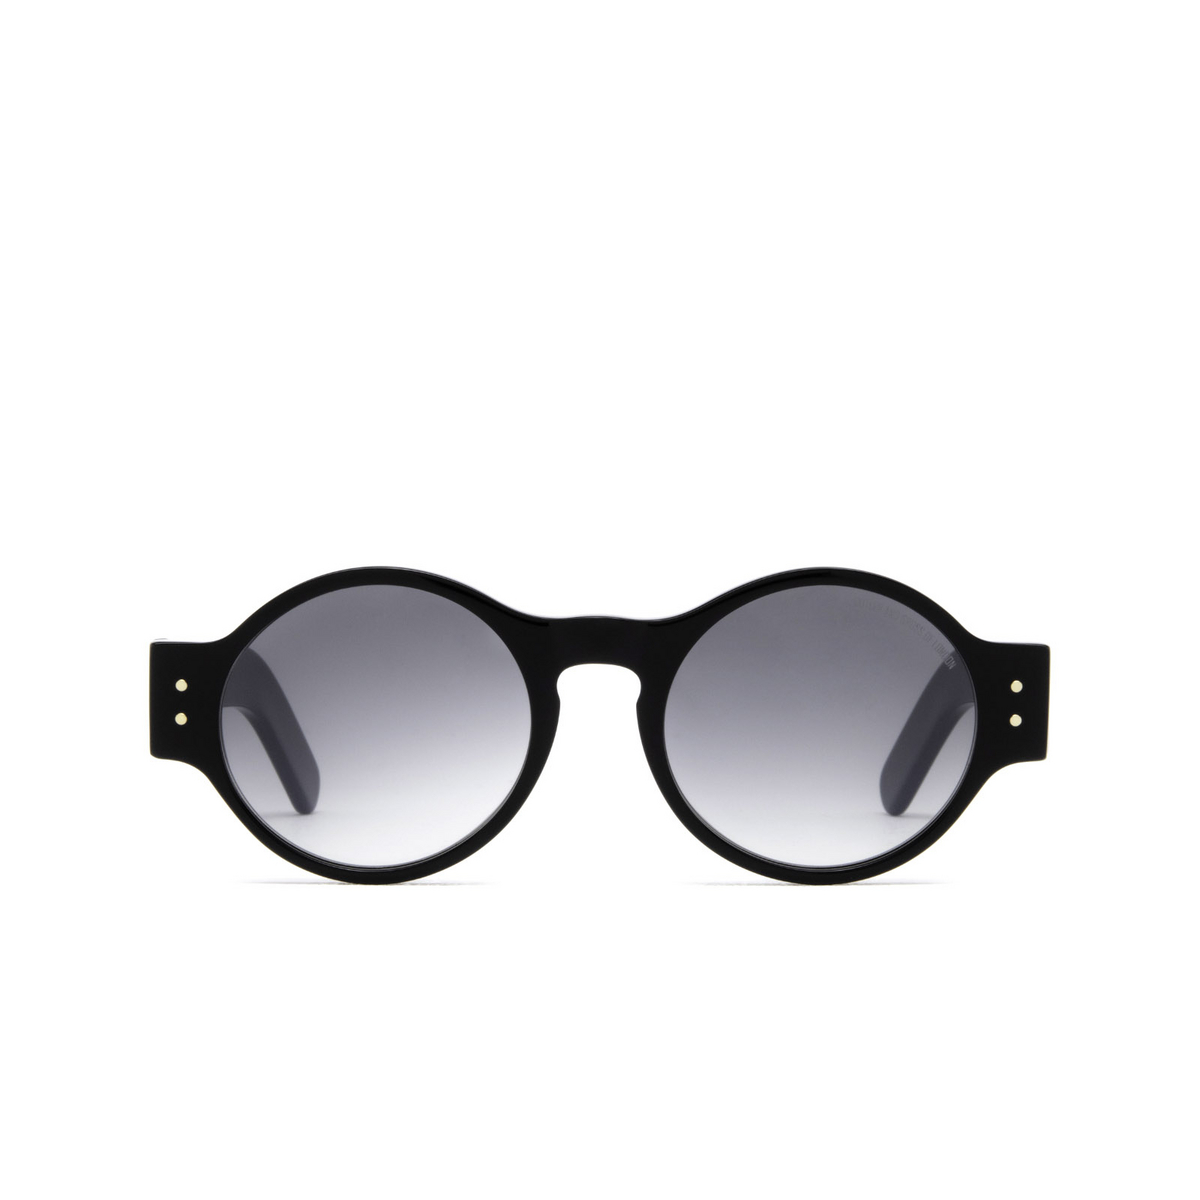 Cutler and Gross® Round Sunglasses: 1374 SUN color Black 01 - front view.